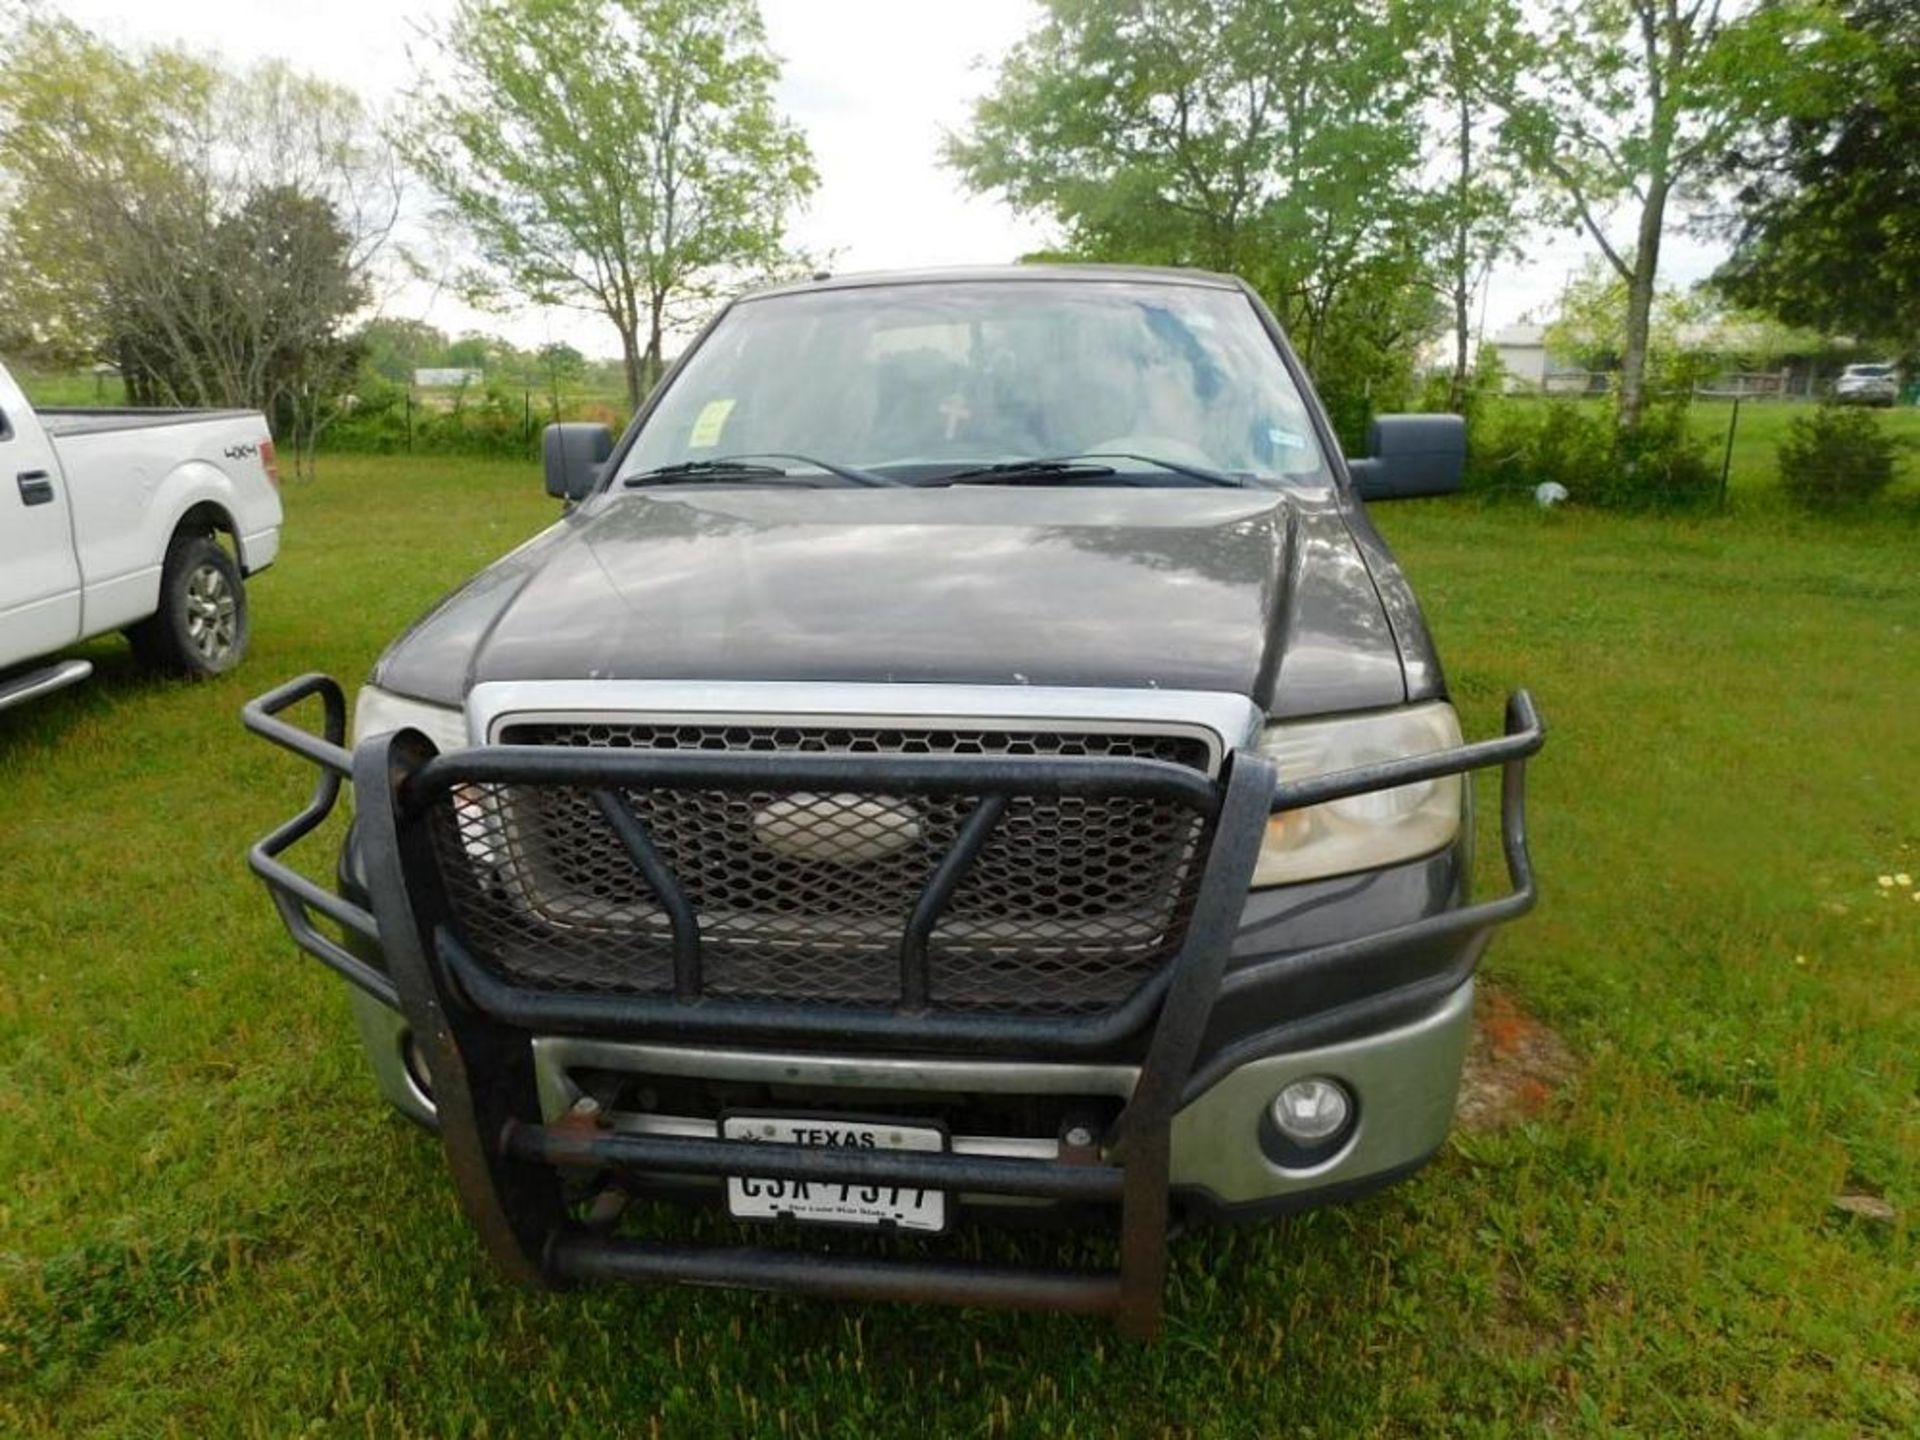 2007 Ford F-150 Lariat 4x4 Crew Cab Pick-up Truck, VIN N/A, 5-1/2 ft. Bed, 5.4 Liter Triton Gasoline - Image 3 of 4